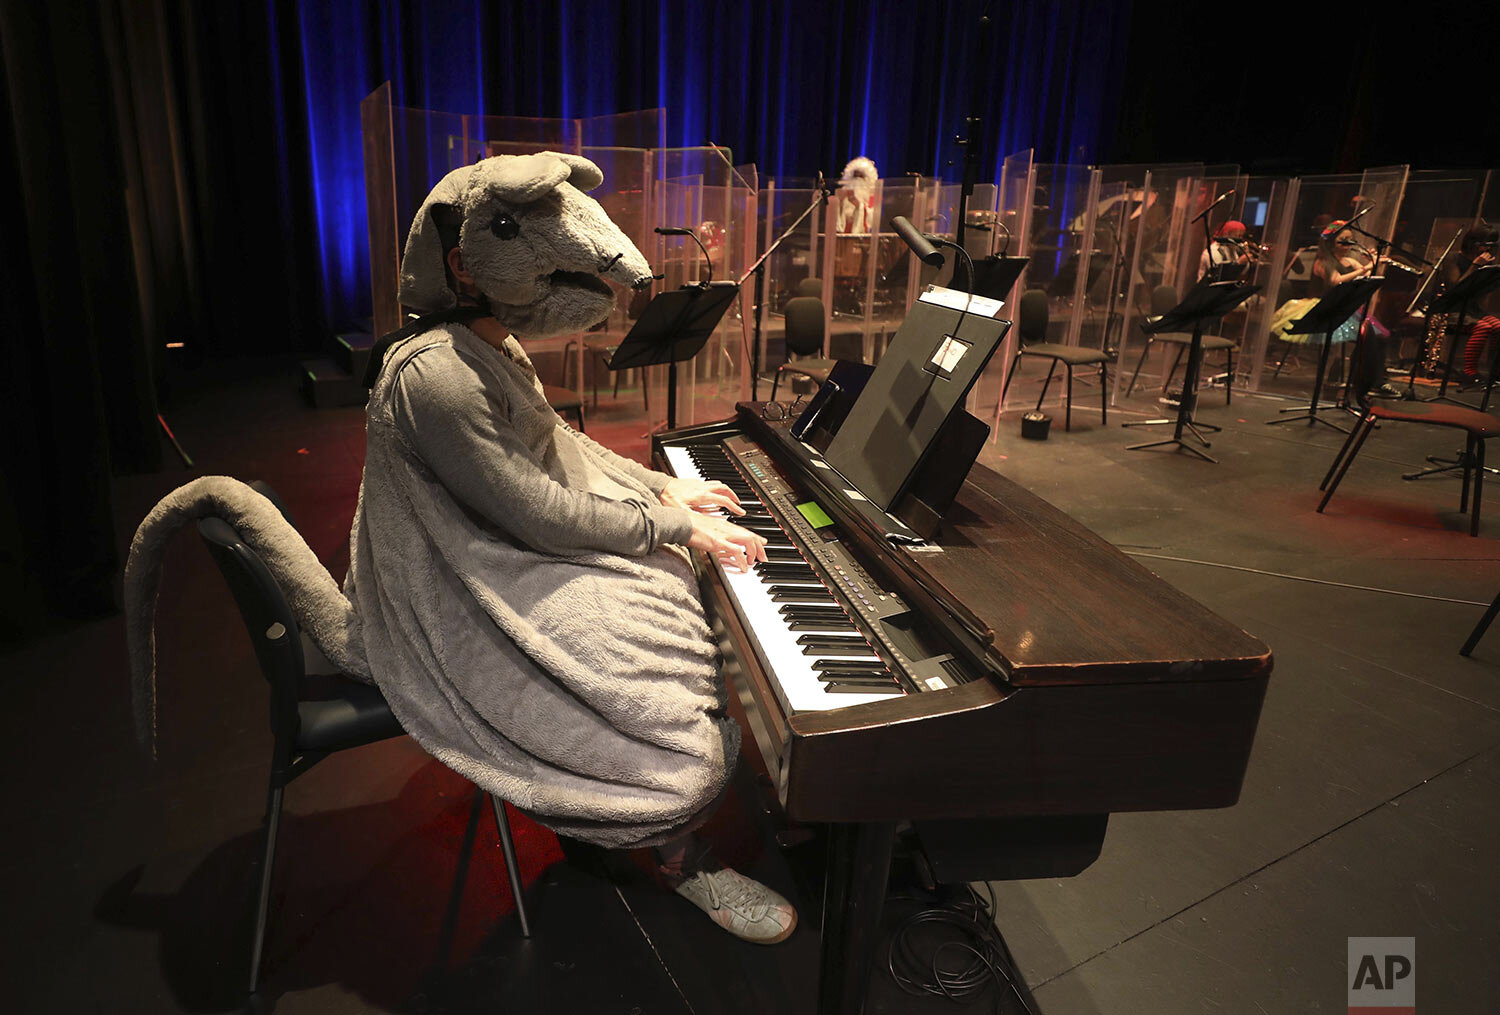  A pianist in a rat costume participates in a recorded Halloween concert by the Bogota and Youth Philharmonic Orchestras at the Colsubsidio Theater in Bogota, Colombia, Oct. 30, 2020. (AP Photo/Fernando Vergara) 